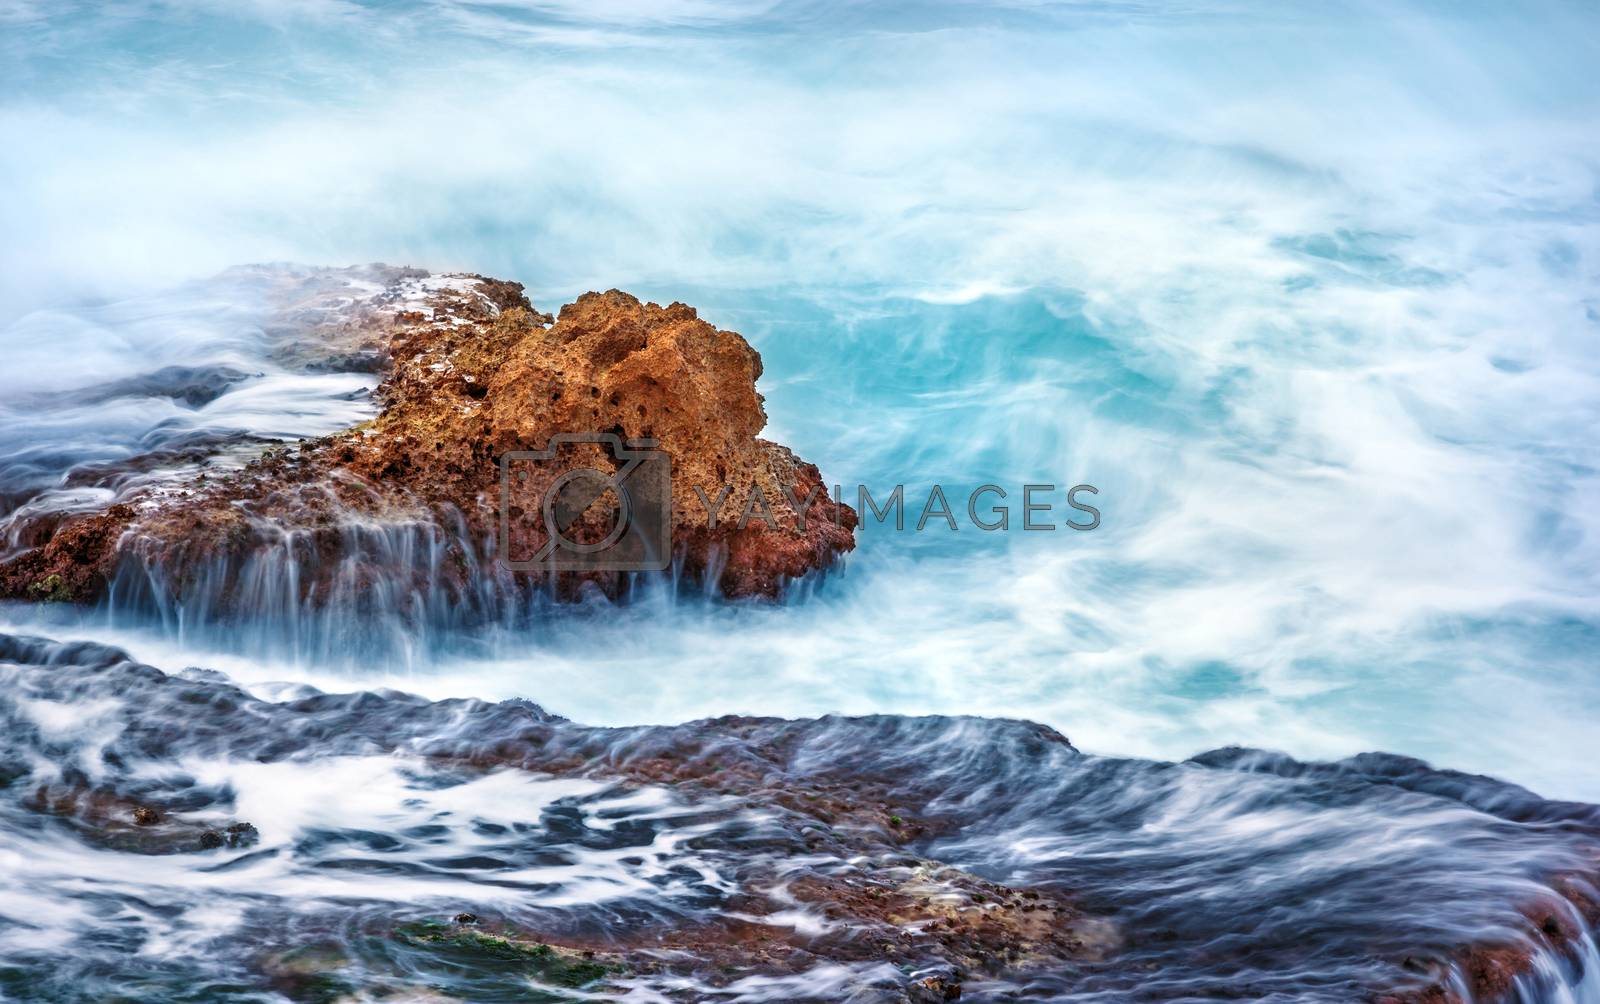 Royalty free image of Rock in the sea by Anna_Omelchenko